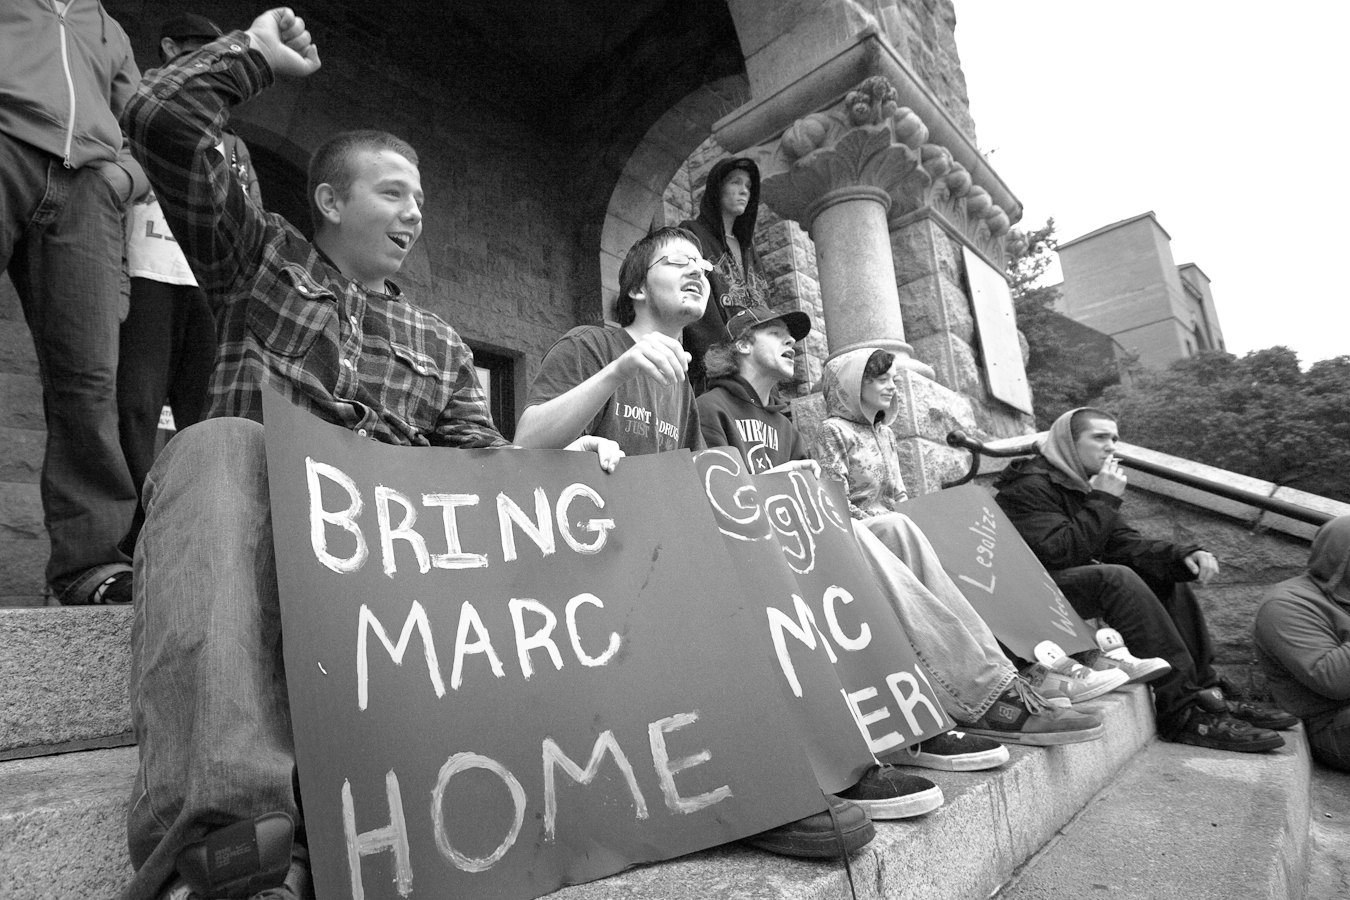 A group protests the inprisonment of Marc Emery - Courthouse Steps - Water Street